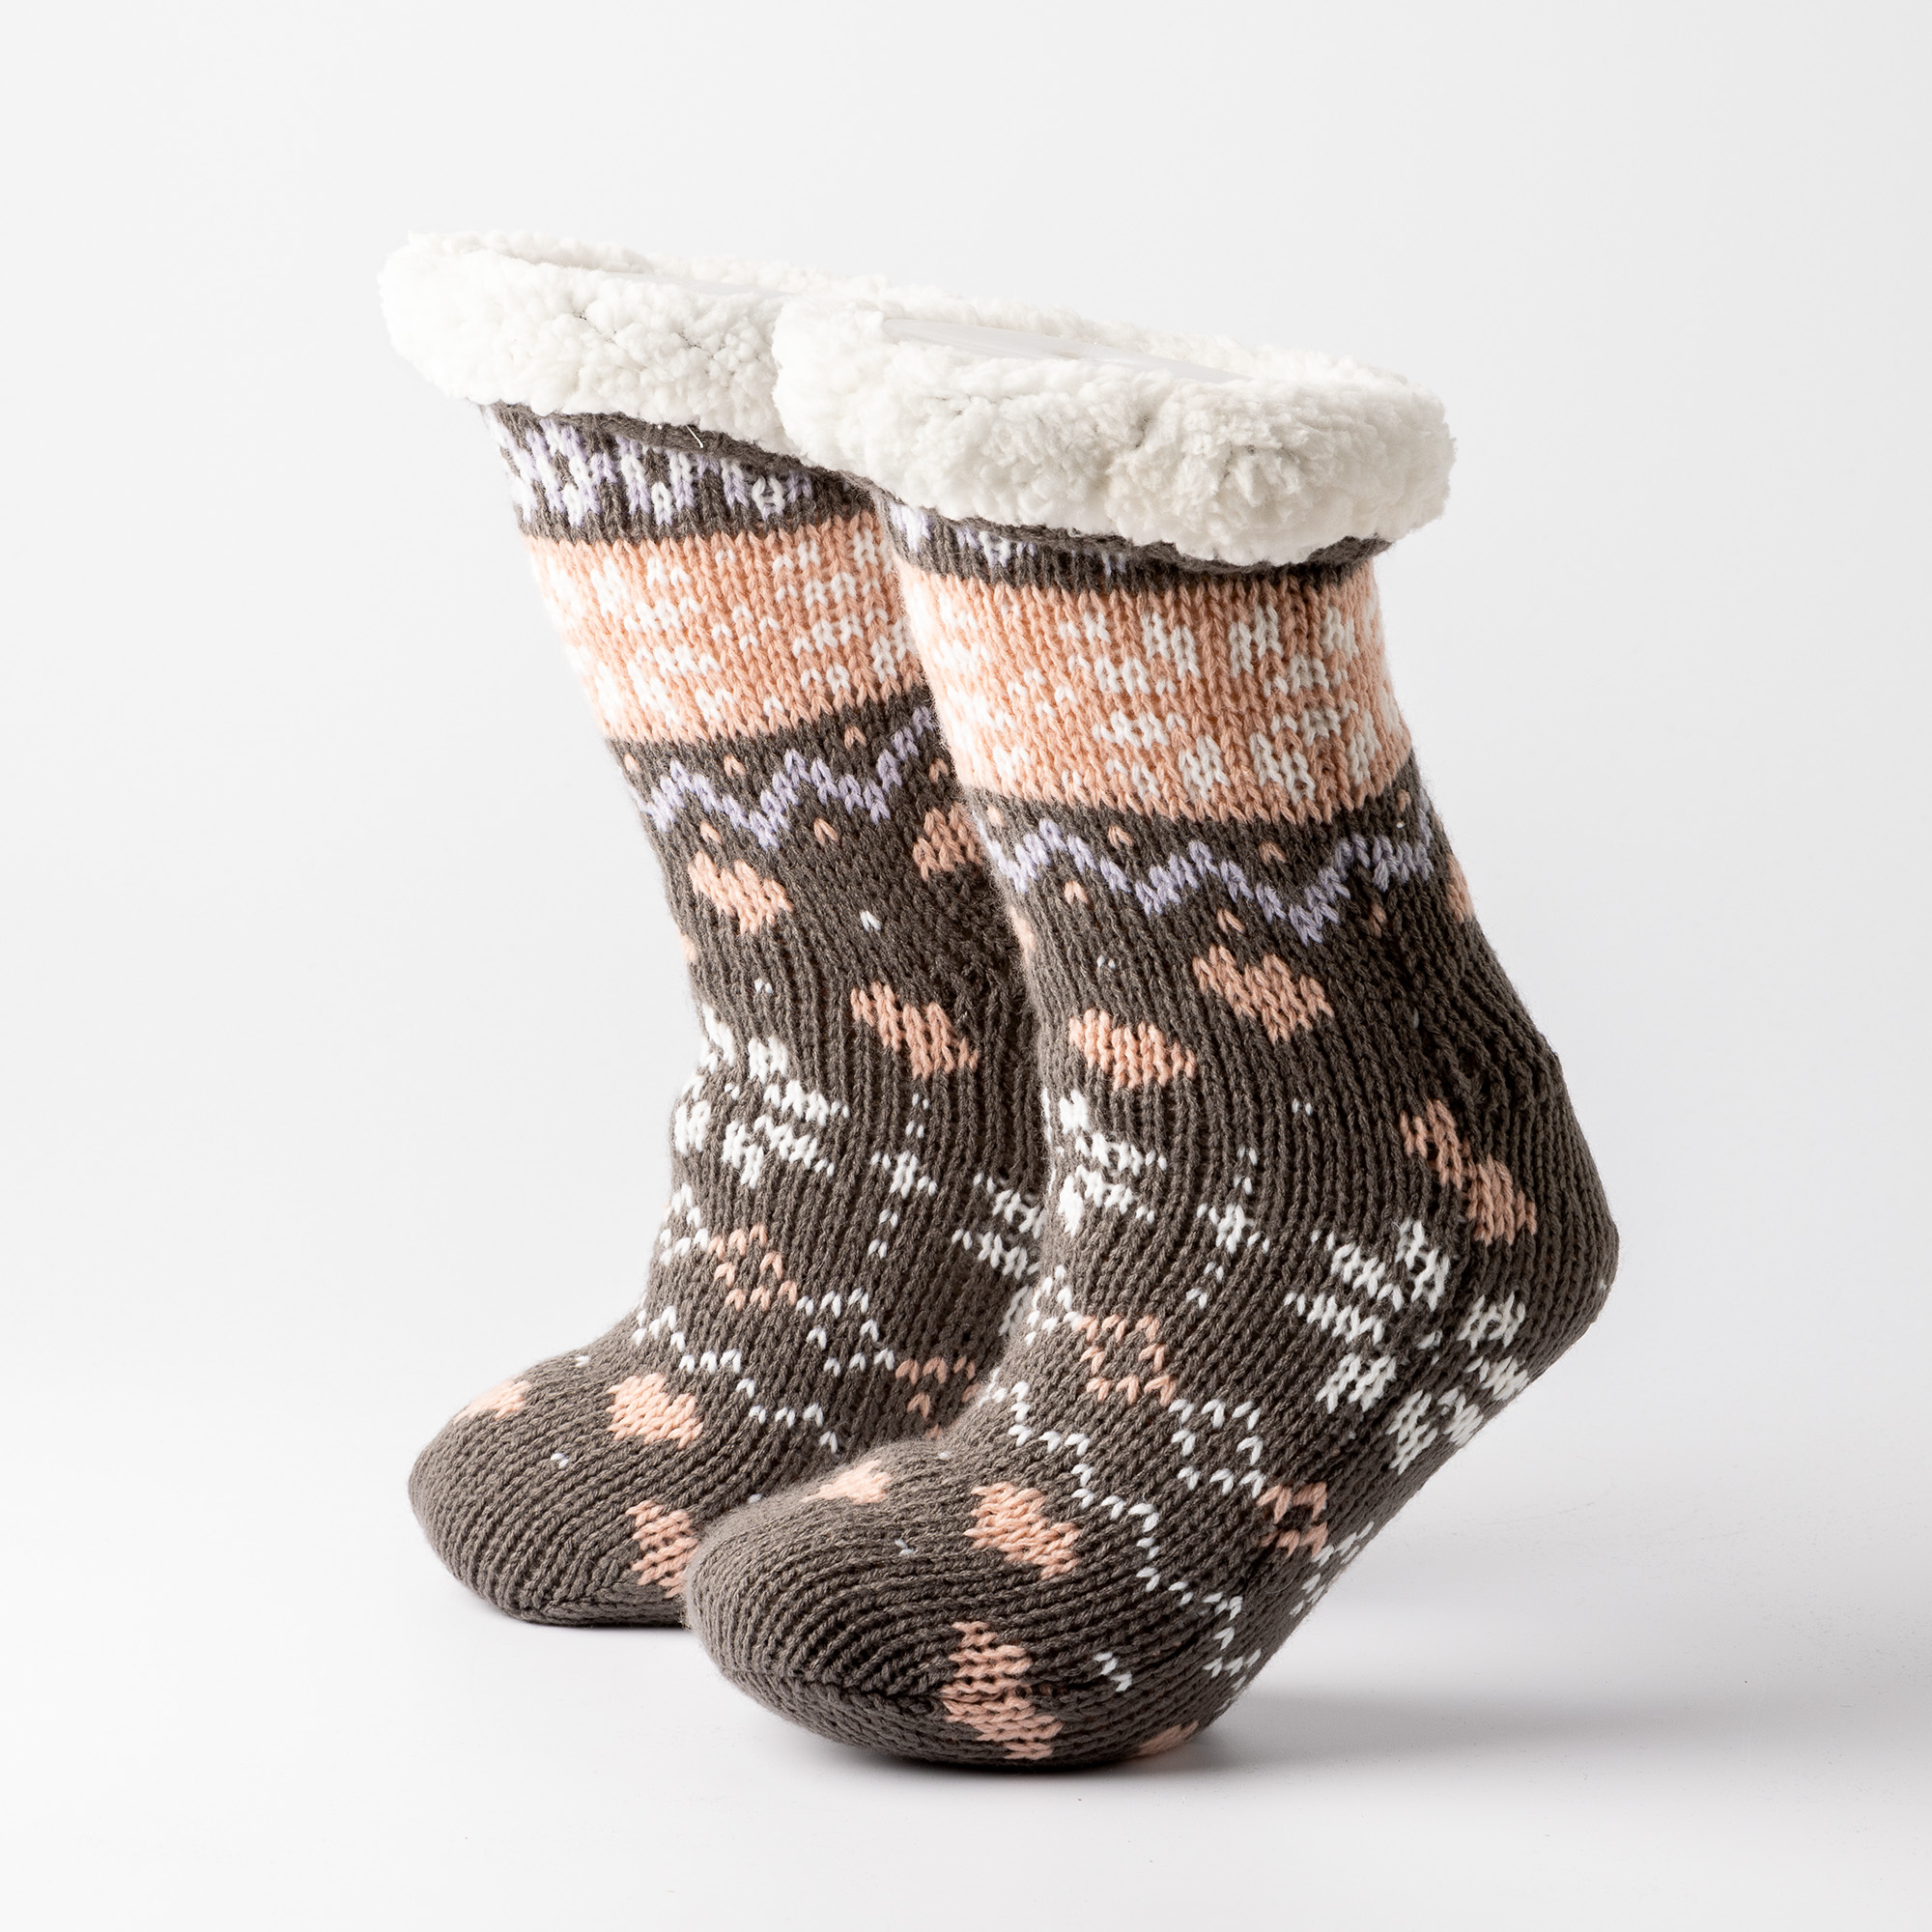 NOOR - House socks - non-slip - with sherpa lining - one size - Charcoal Gray - antracite